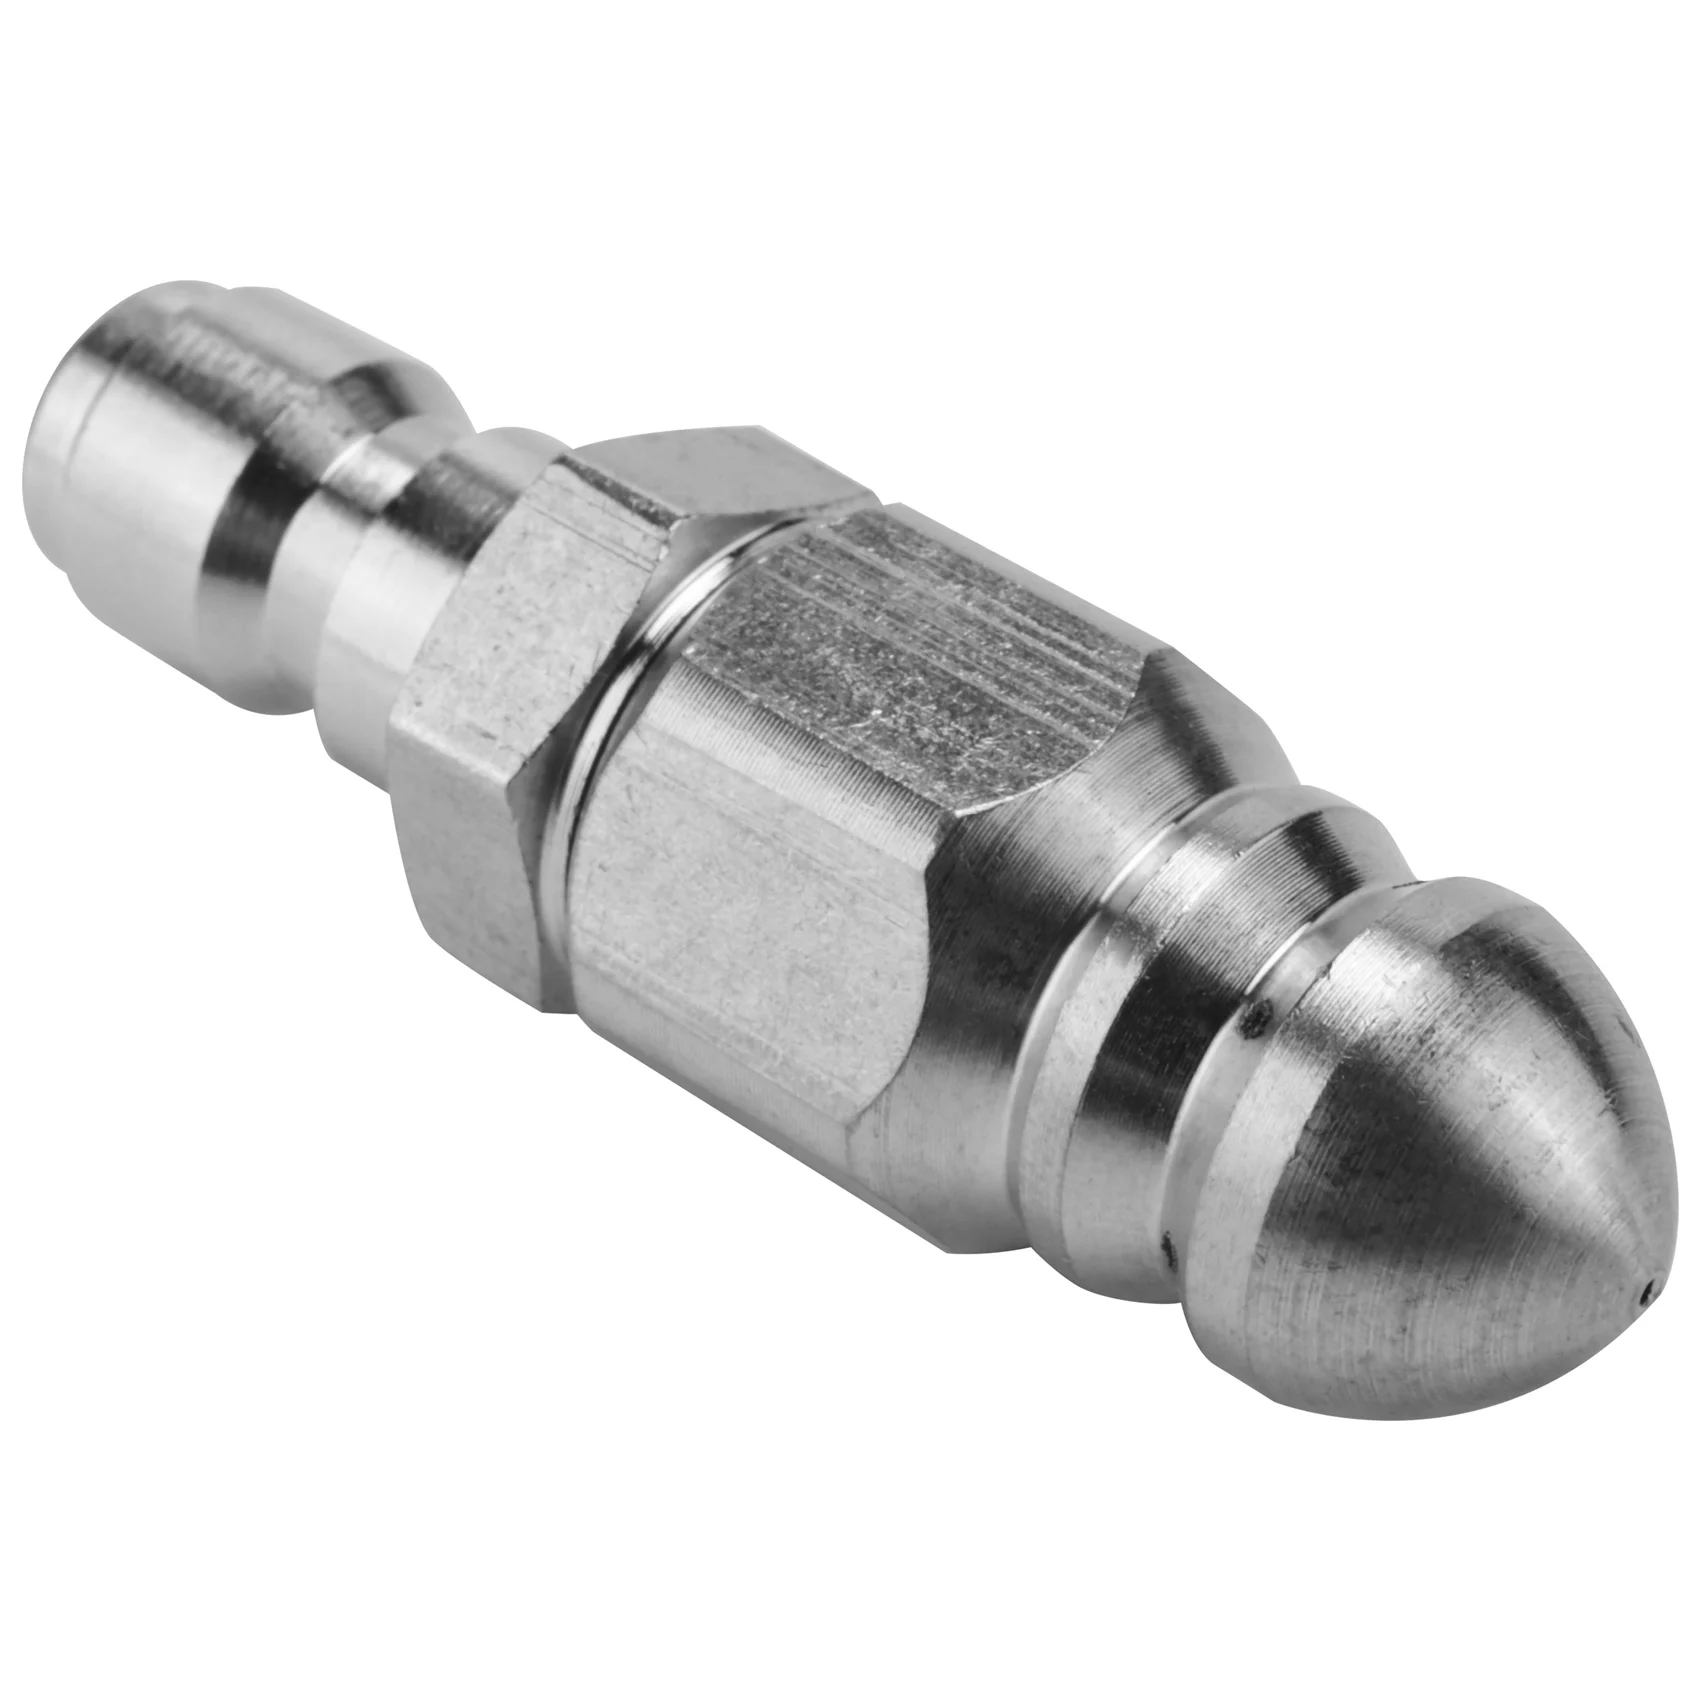 

Sewer Jetter Nozzle for Pressure Washer with 1/4 inch Quick Connect - for Drain Jetting Clog Remover,1 Front 6 Rear Jets